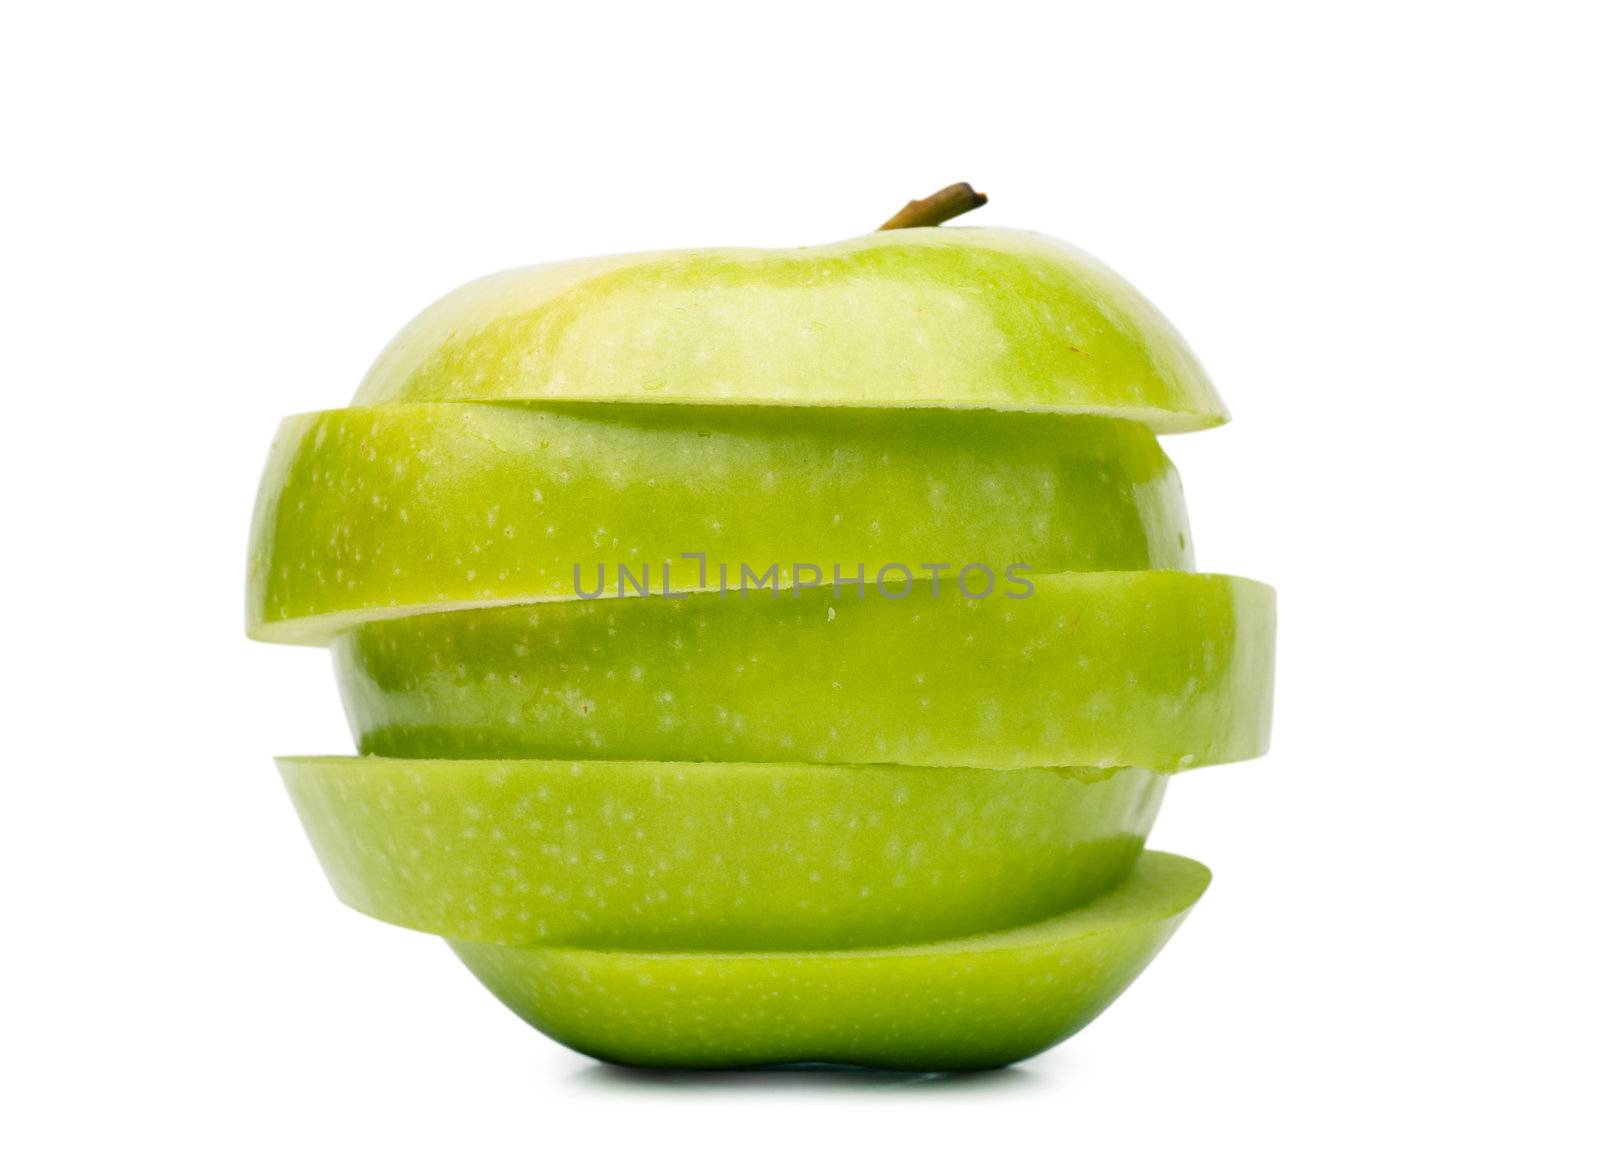 Big green sliced apple isolated over white background